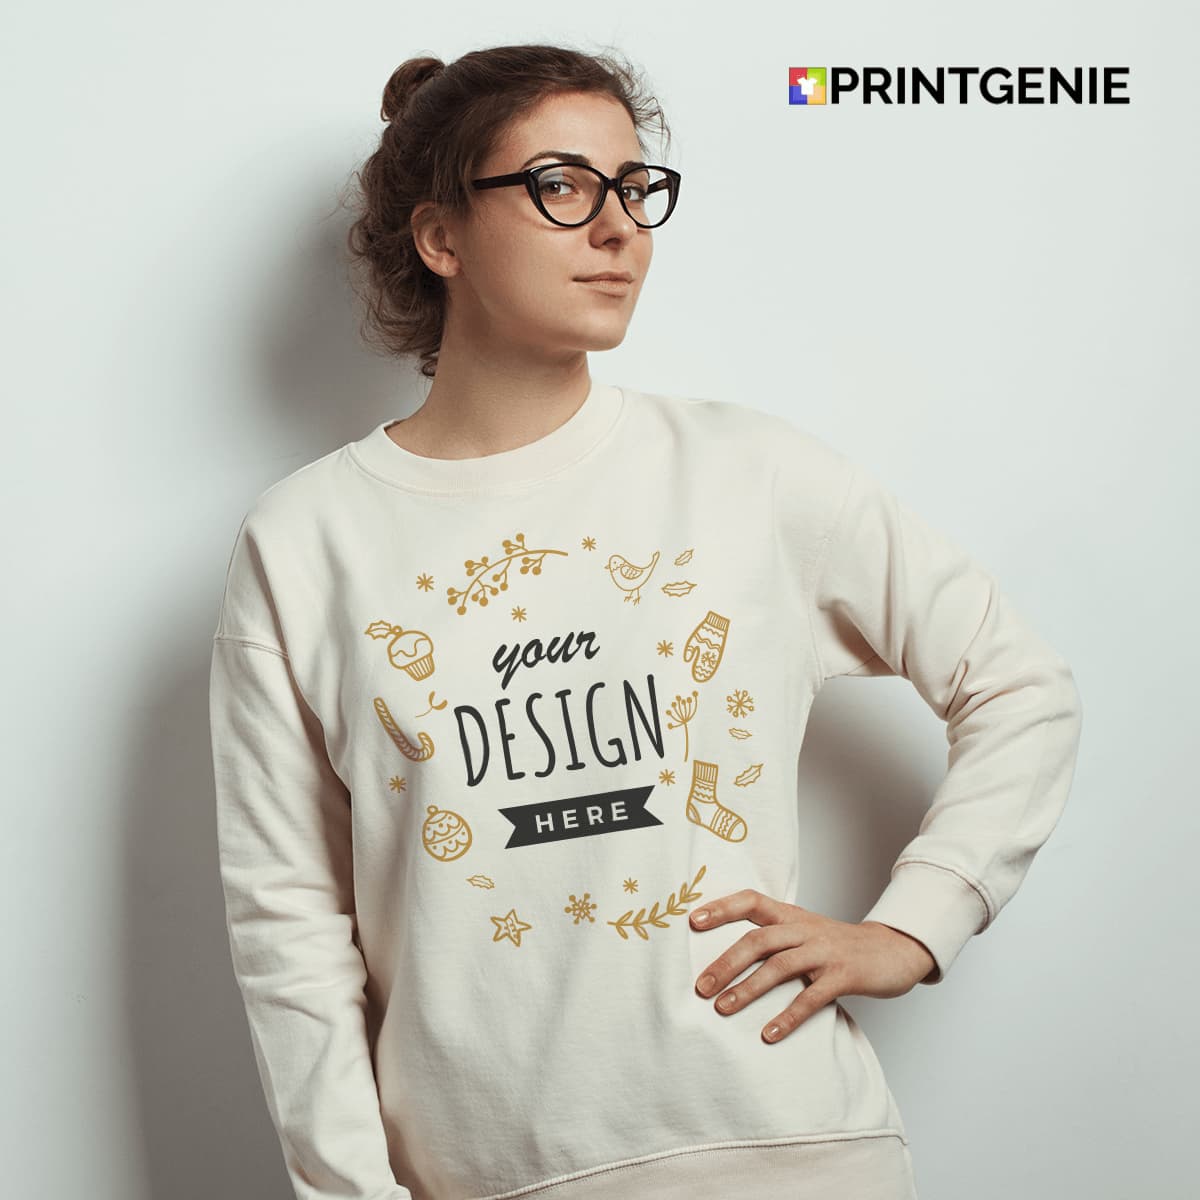 Print on Demand Custom Oversized T-Shirts for Dropshipping